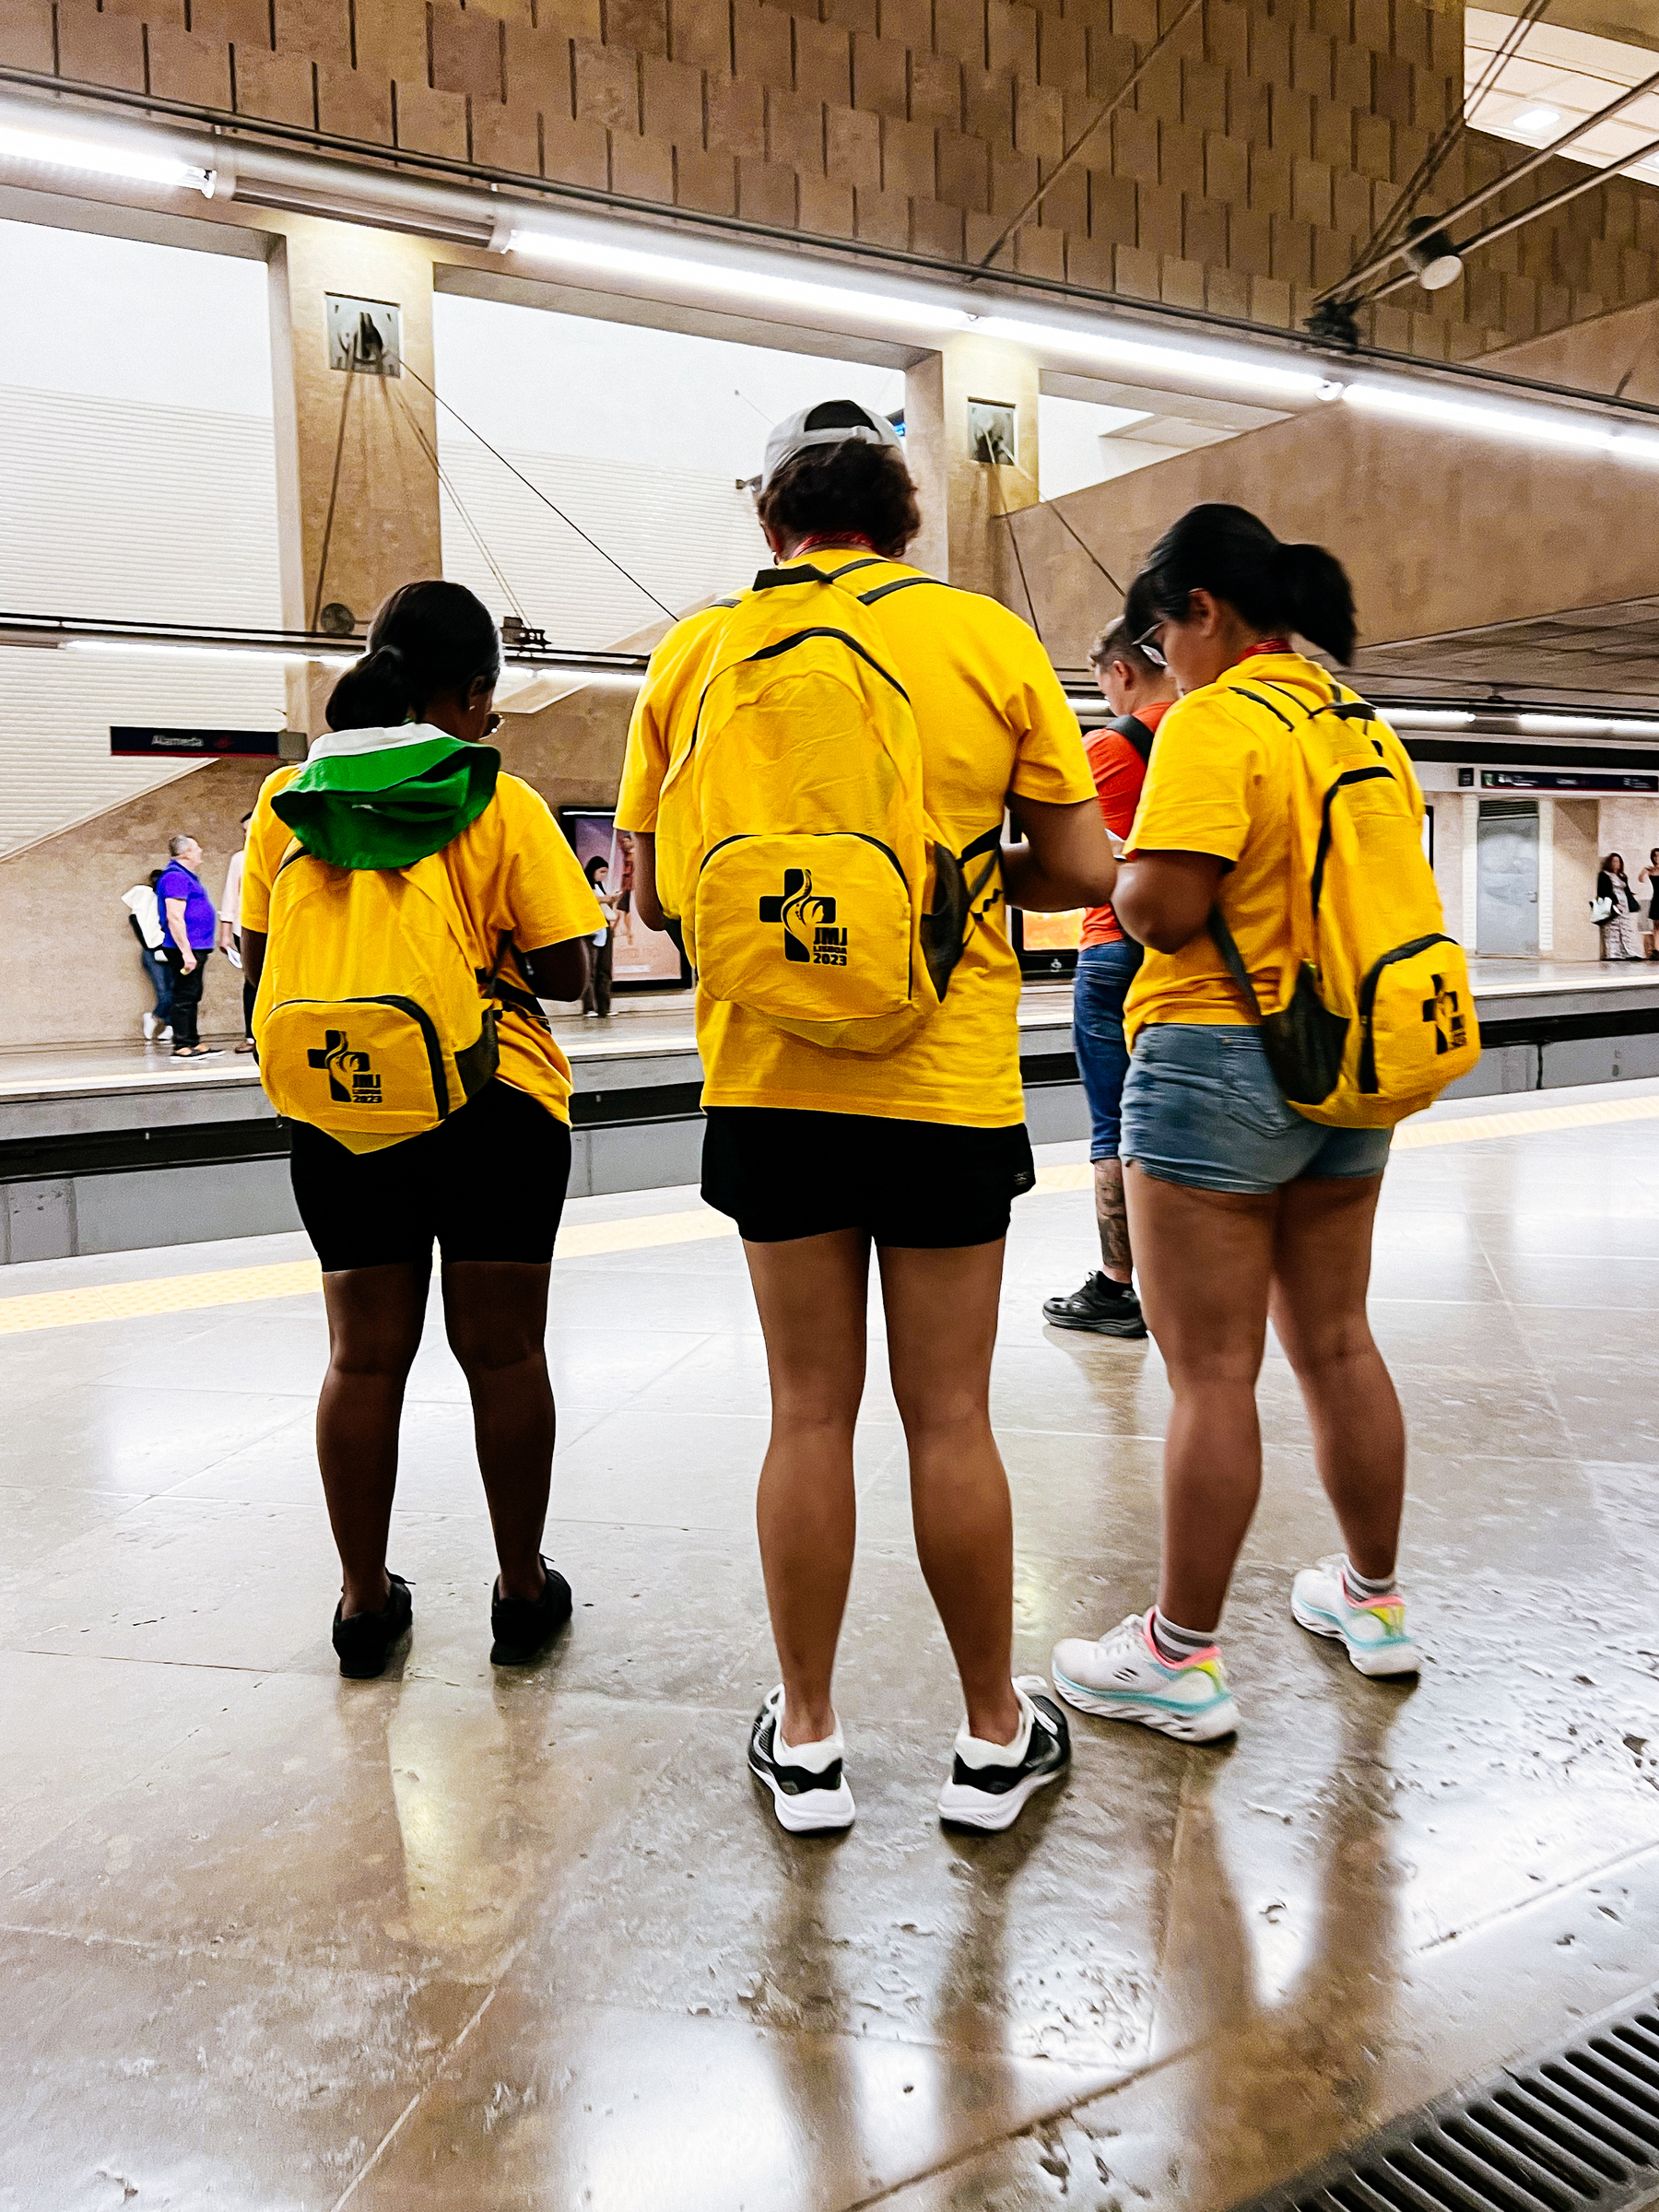 Three people wearing yellow t-shirts and yellow backpacks, waiting for the subway. 